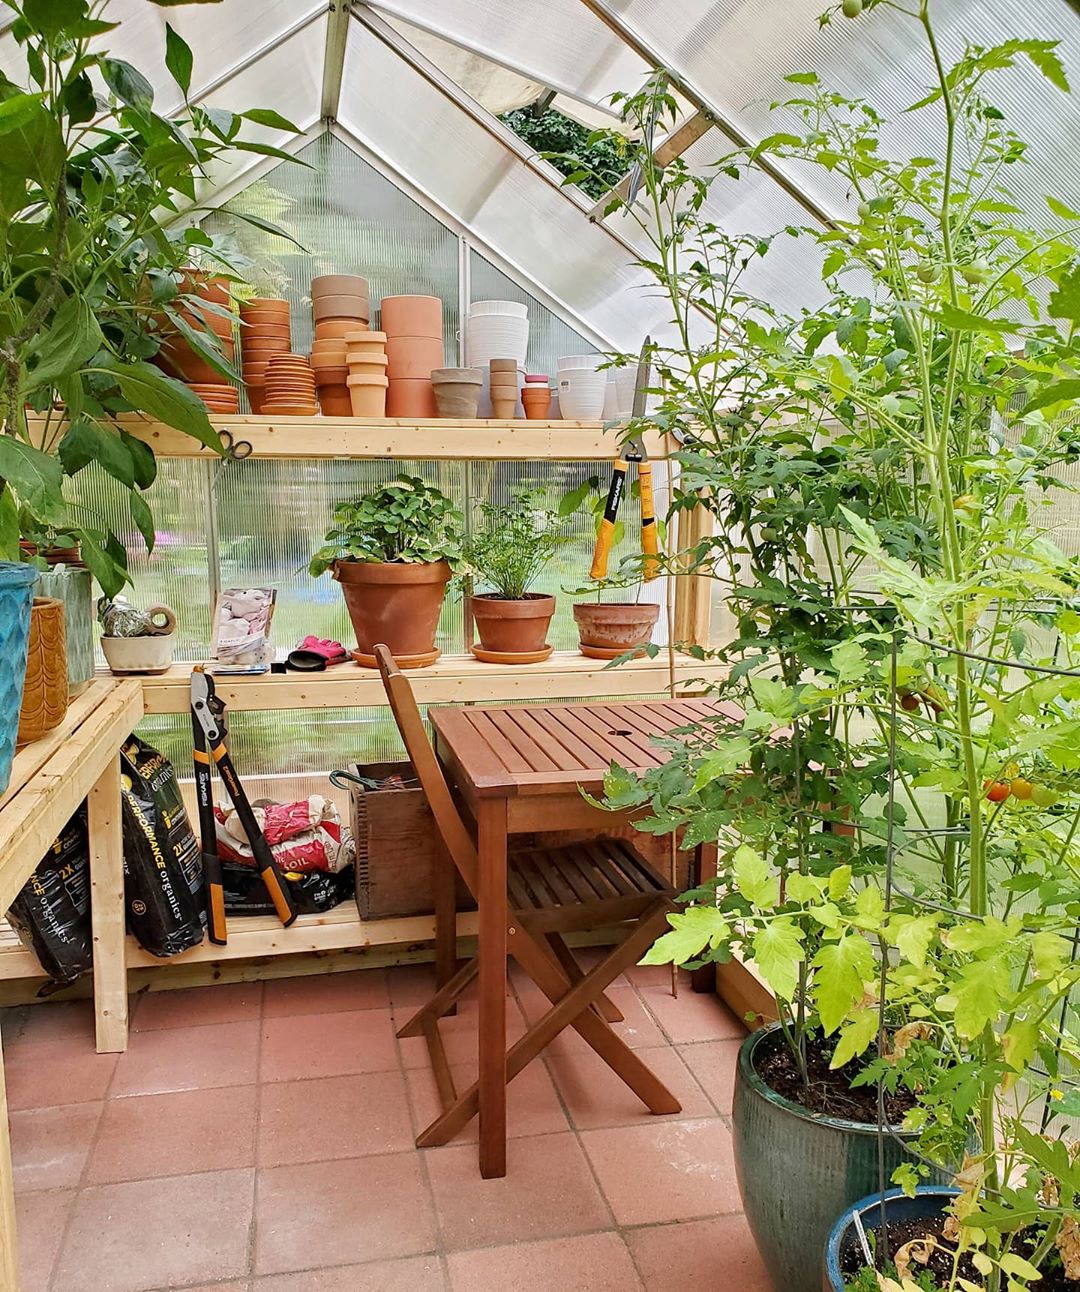 Greenhouse She Shed with Gardening Pots On Shelves. Photo by Instagram user @birthuprising